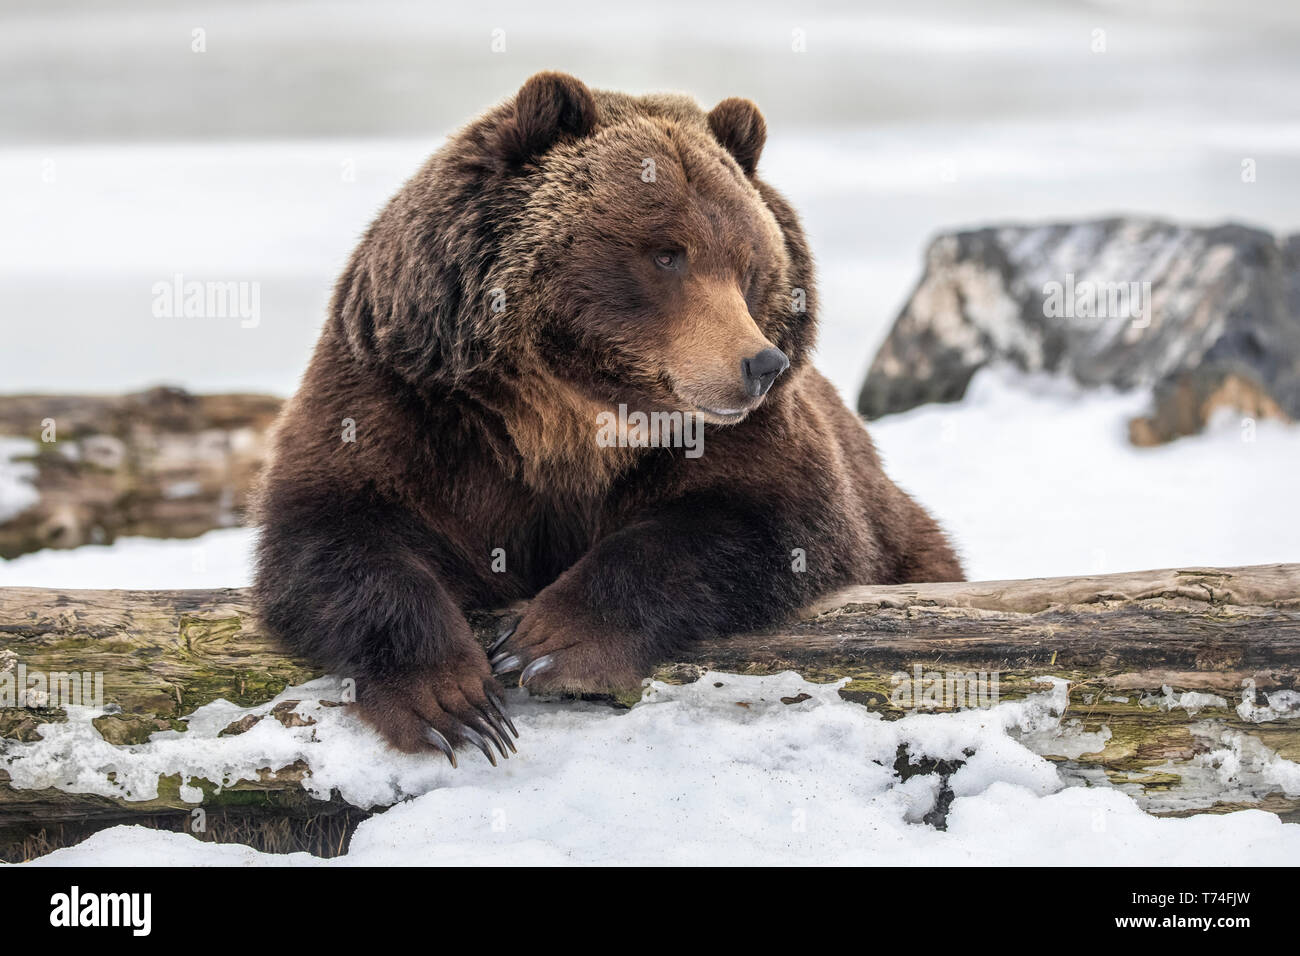 Captive female Grizzly bear (Ursus arctos horribilis), approximately 19 years old, resting in the snow, Alaska Wildlife Conservation Center, South-... Stock Photo